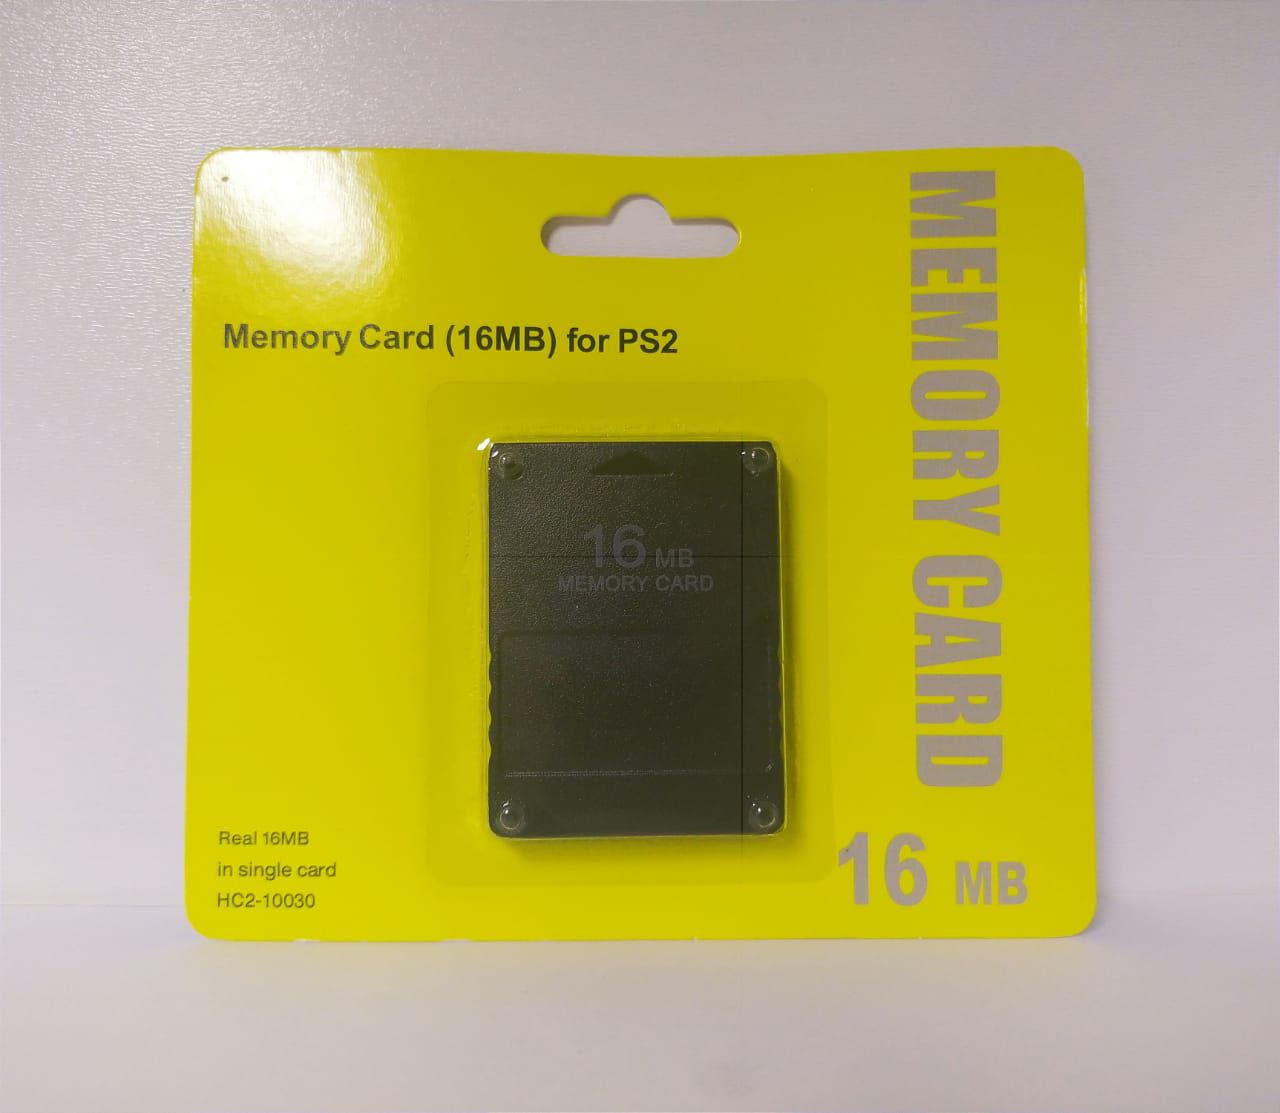 MEMORY CARD PS2 16MB - HC2-10030 - Nelson Games